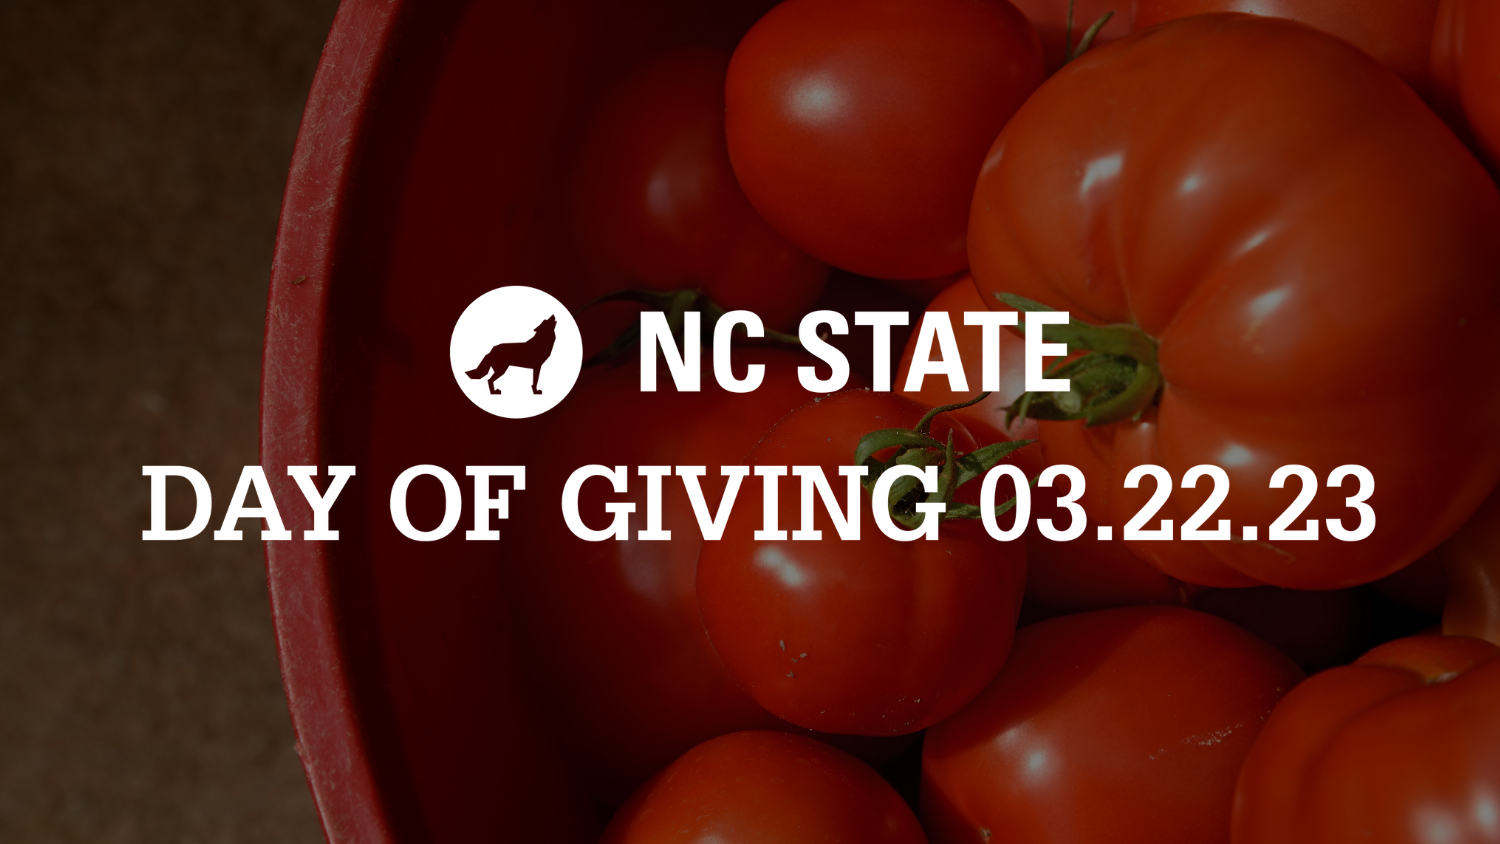 a graphic promoting NC State's Day of Giving